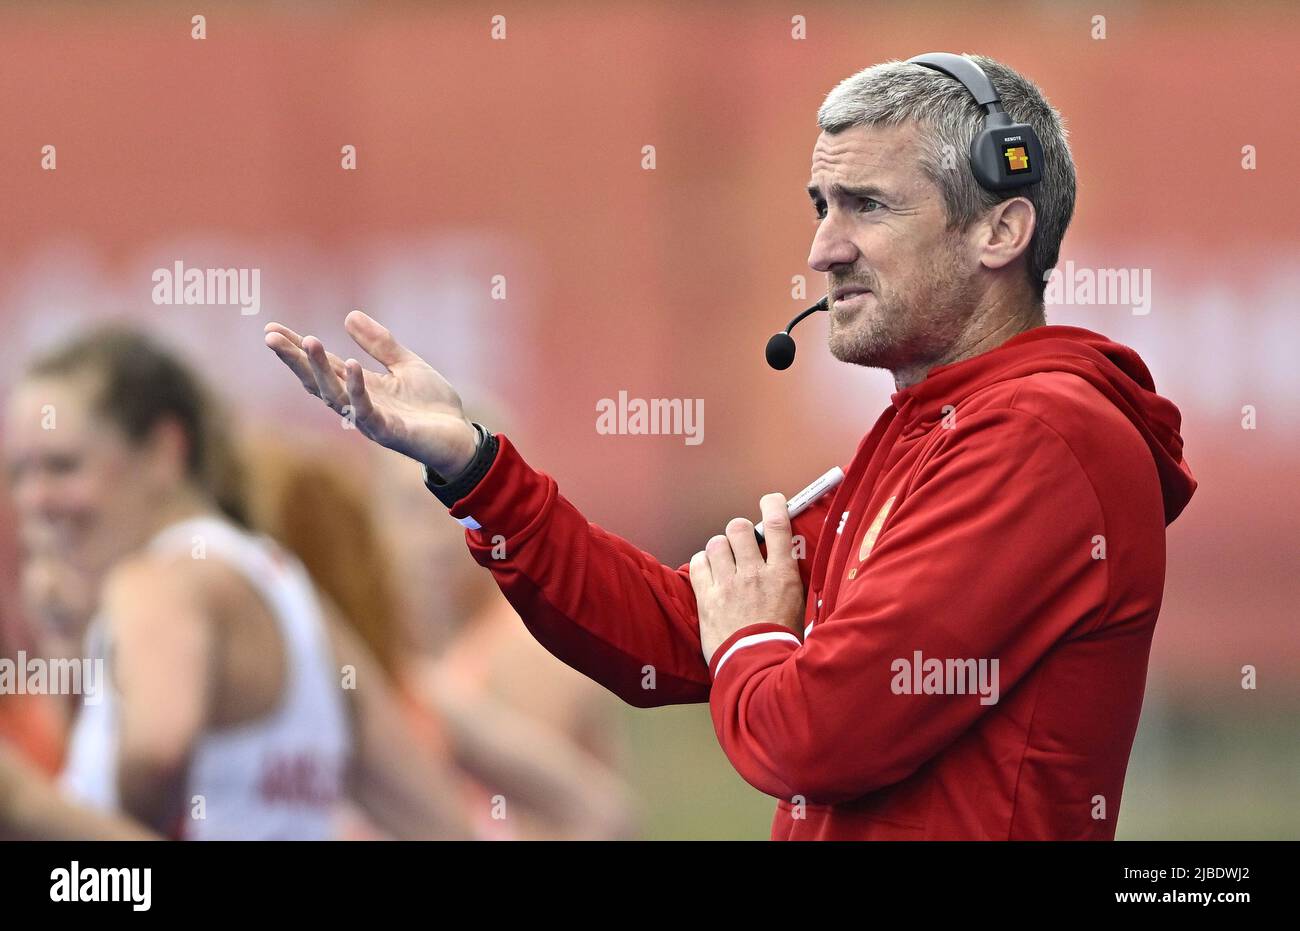 Stratford, United Kingdom. 05th June, 2022. England V Netherlands Womens FIH Pro League. Lee Valley Hockey centre. Stratford. England coch David Ralph during the England V Netherlands Womens FIH Pro League hockey match. Credit: Sport In Pictures/Alamy Live News Stock Photo